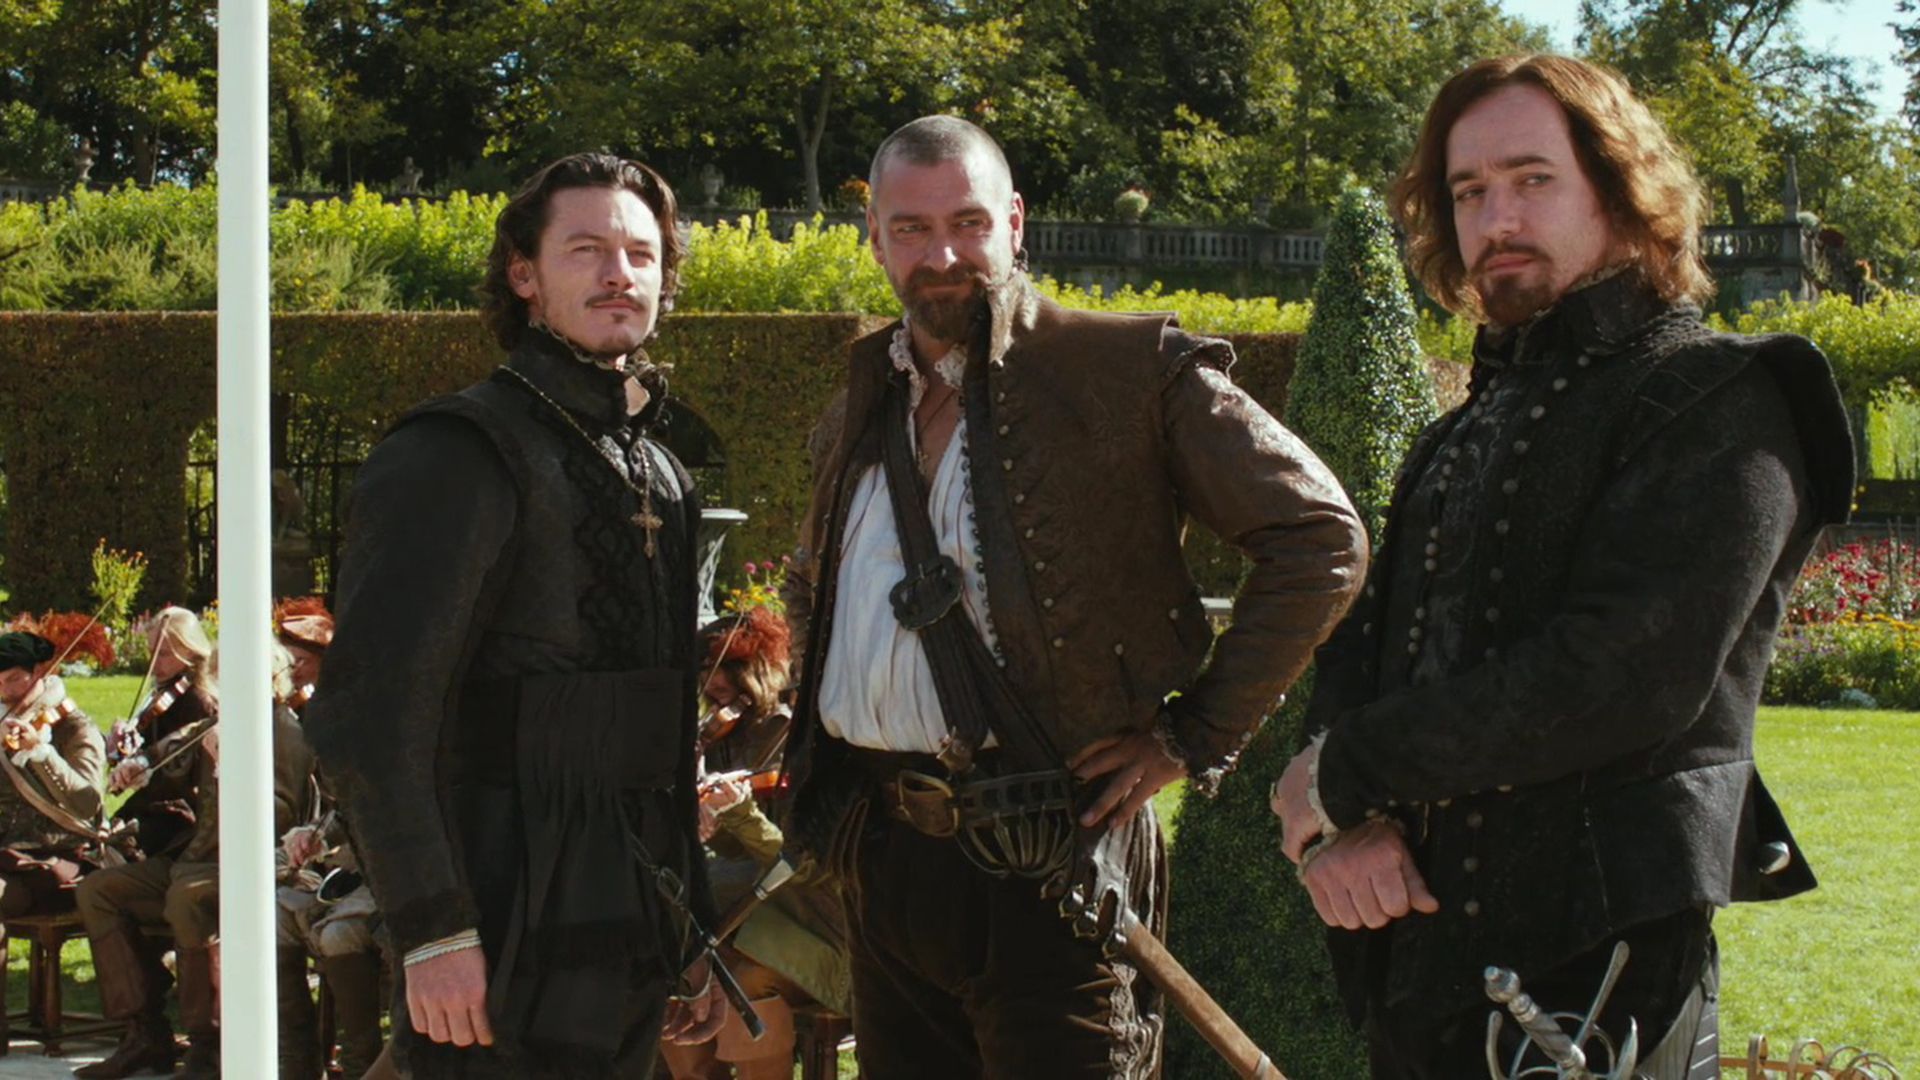 The Three Musketeers (2011) Wallpaper: The Three Musketeers. The three musketeers, The three musketeers Musketeers